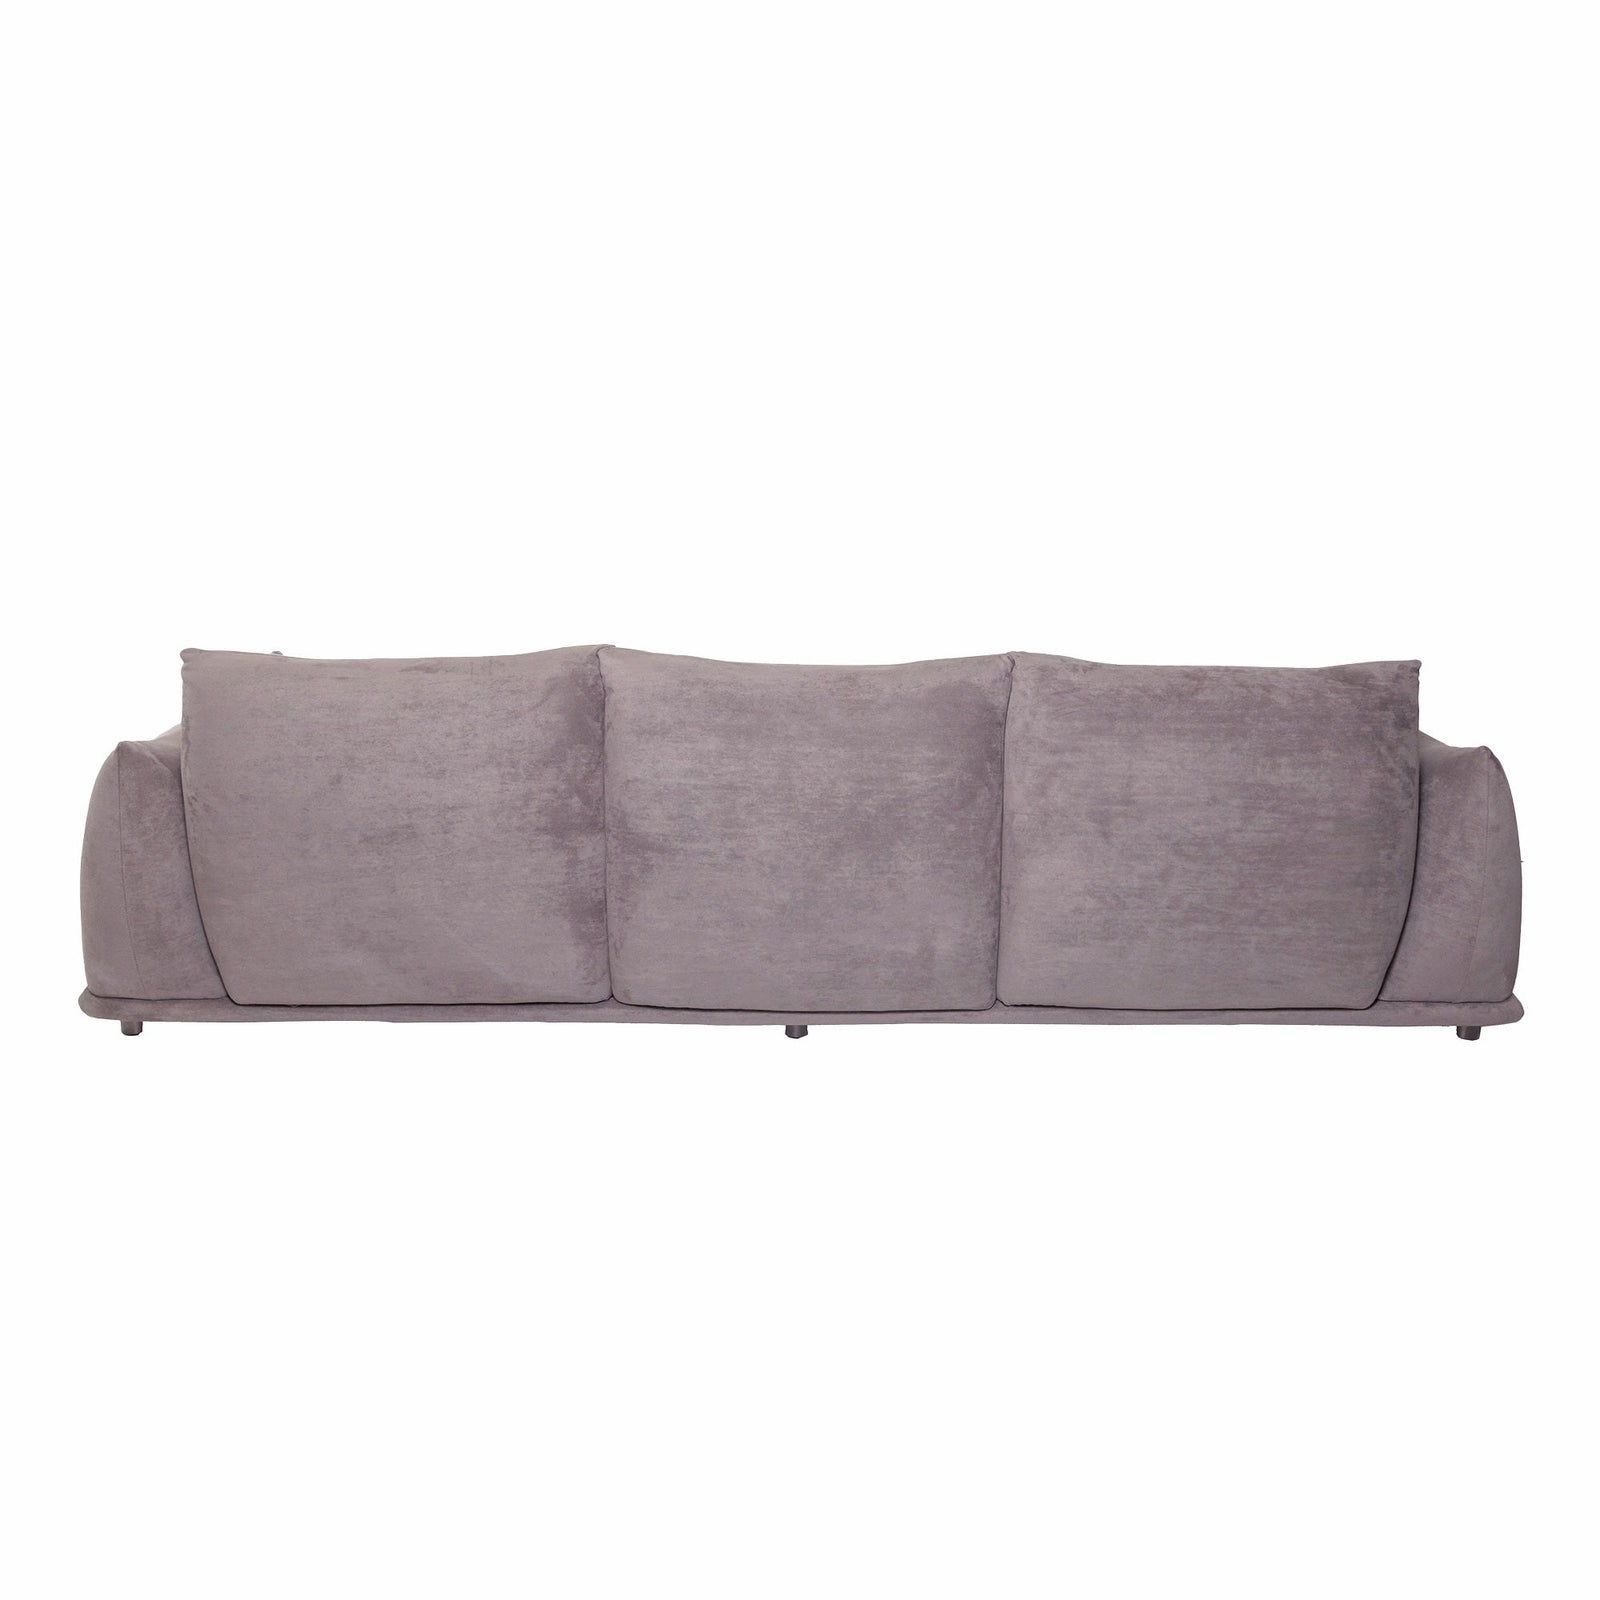 Marenco Style Sofa Mid Grey Suede 3 Seater